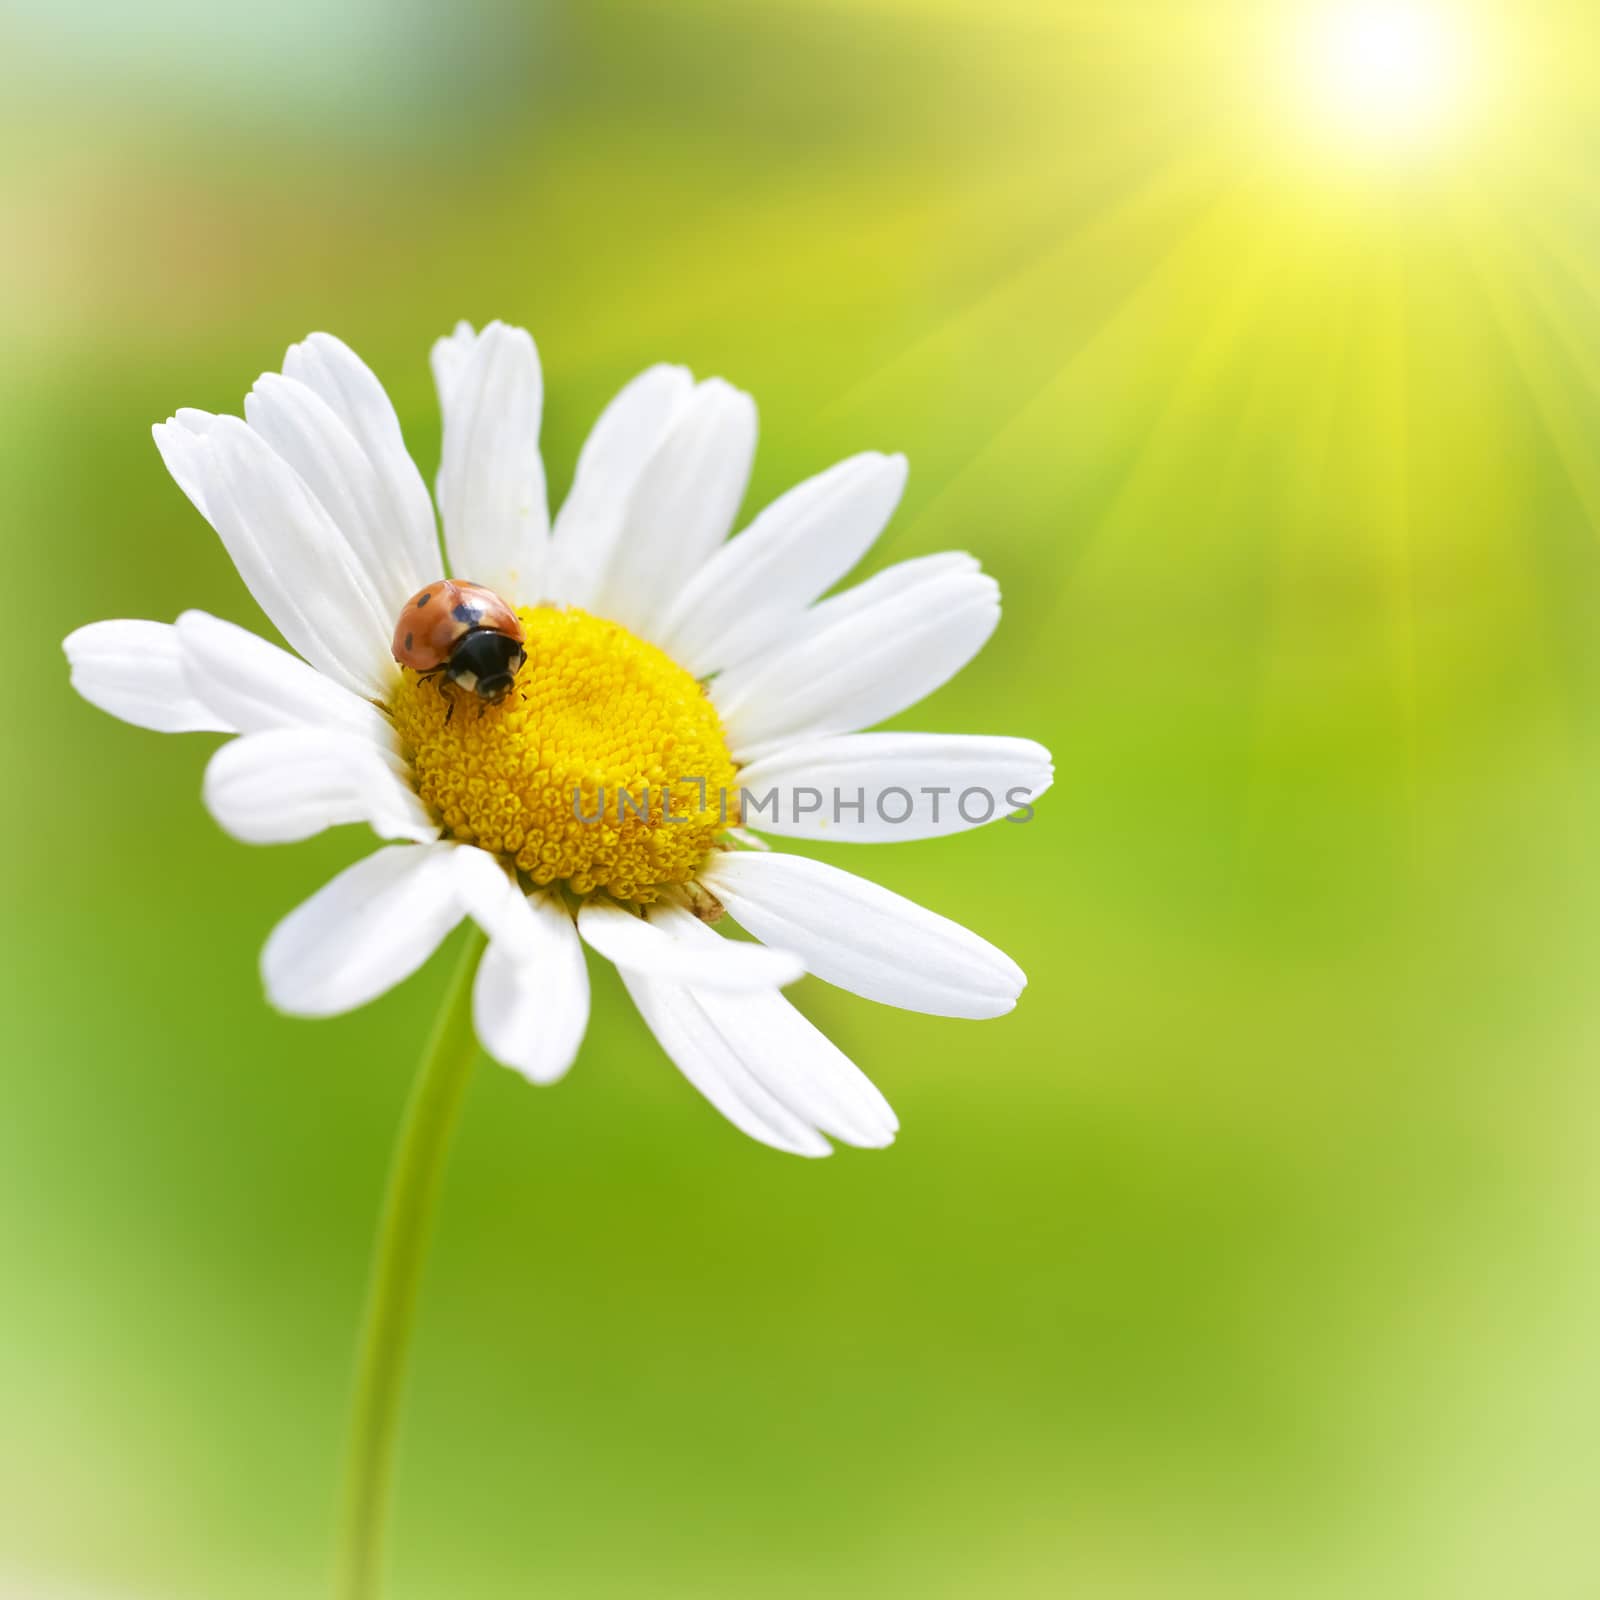 White flower daisy- camomile and red ladybug on green background with bright sun